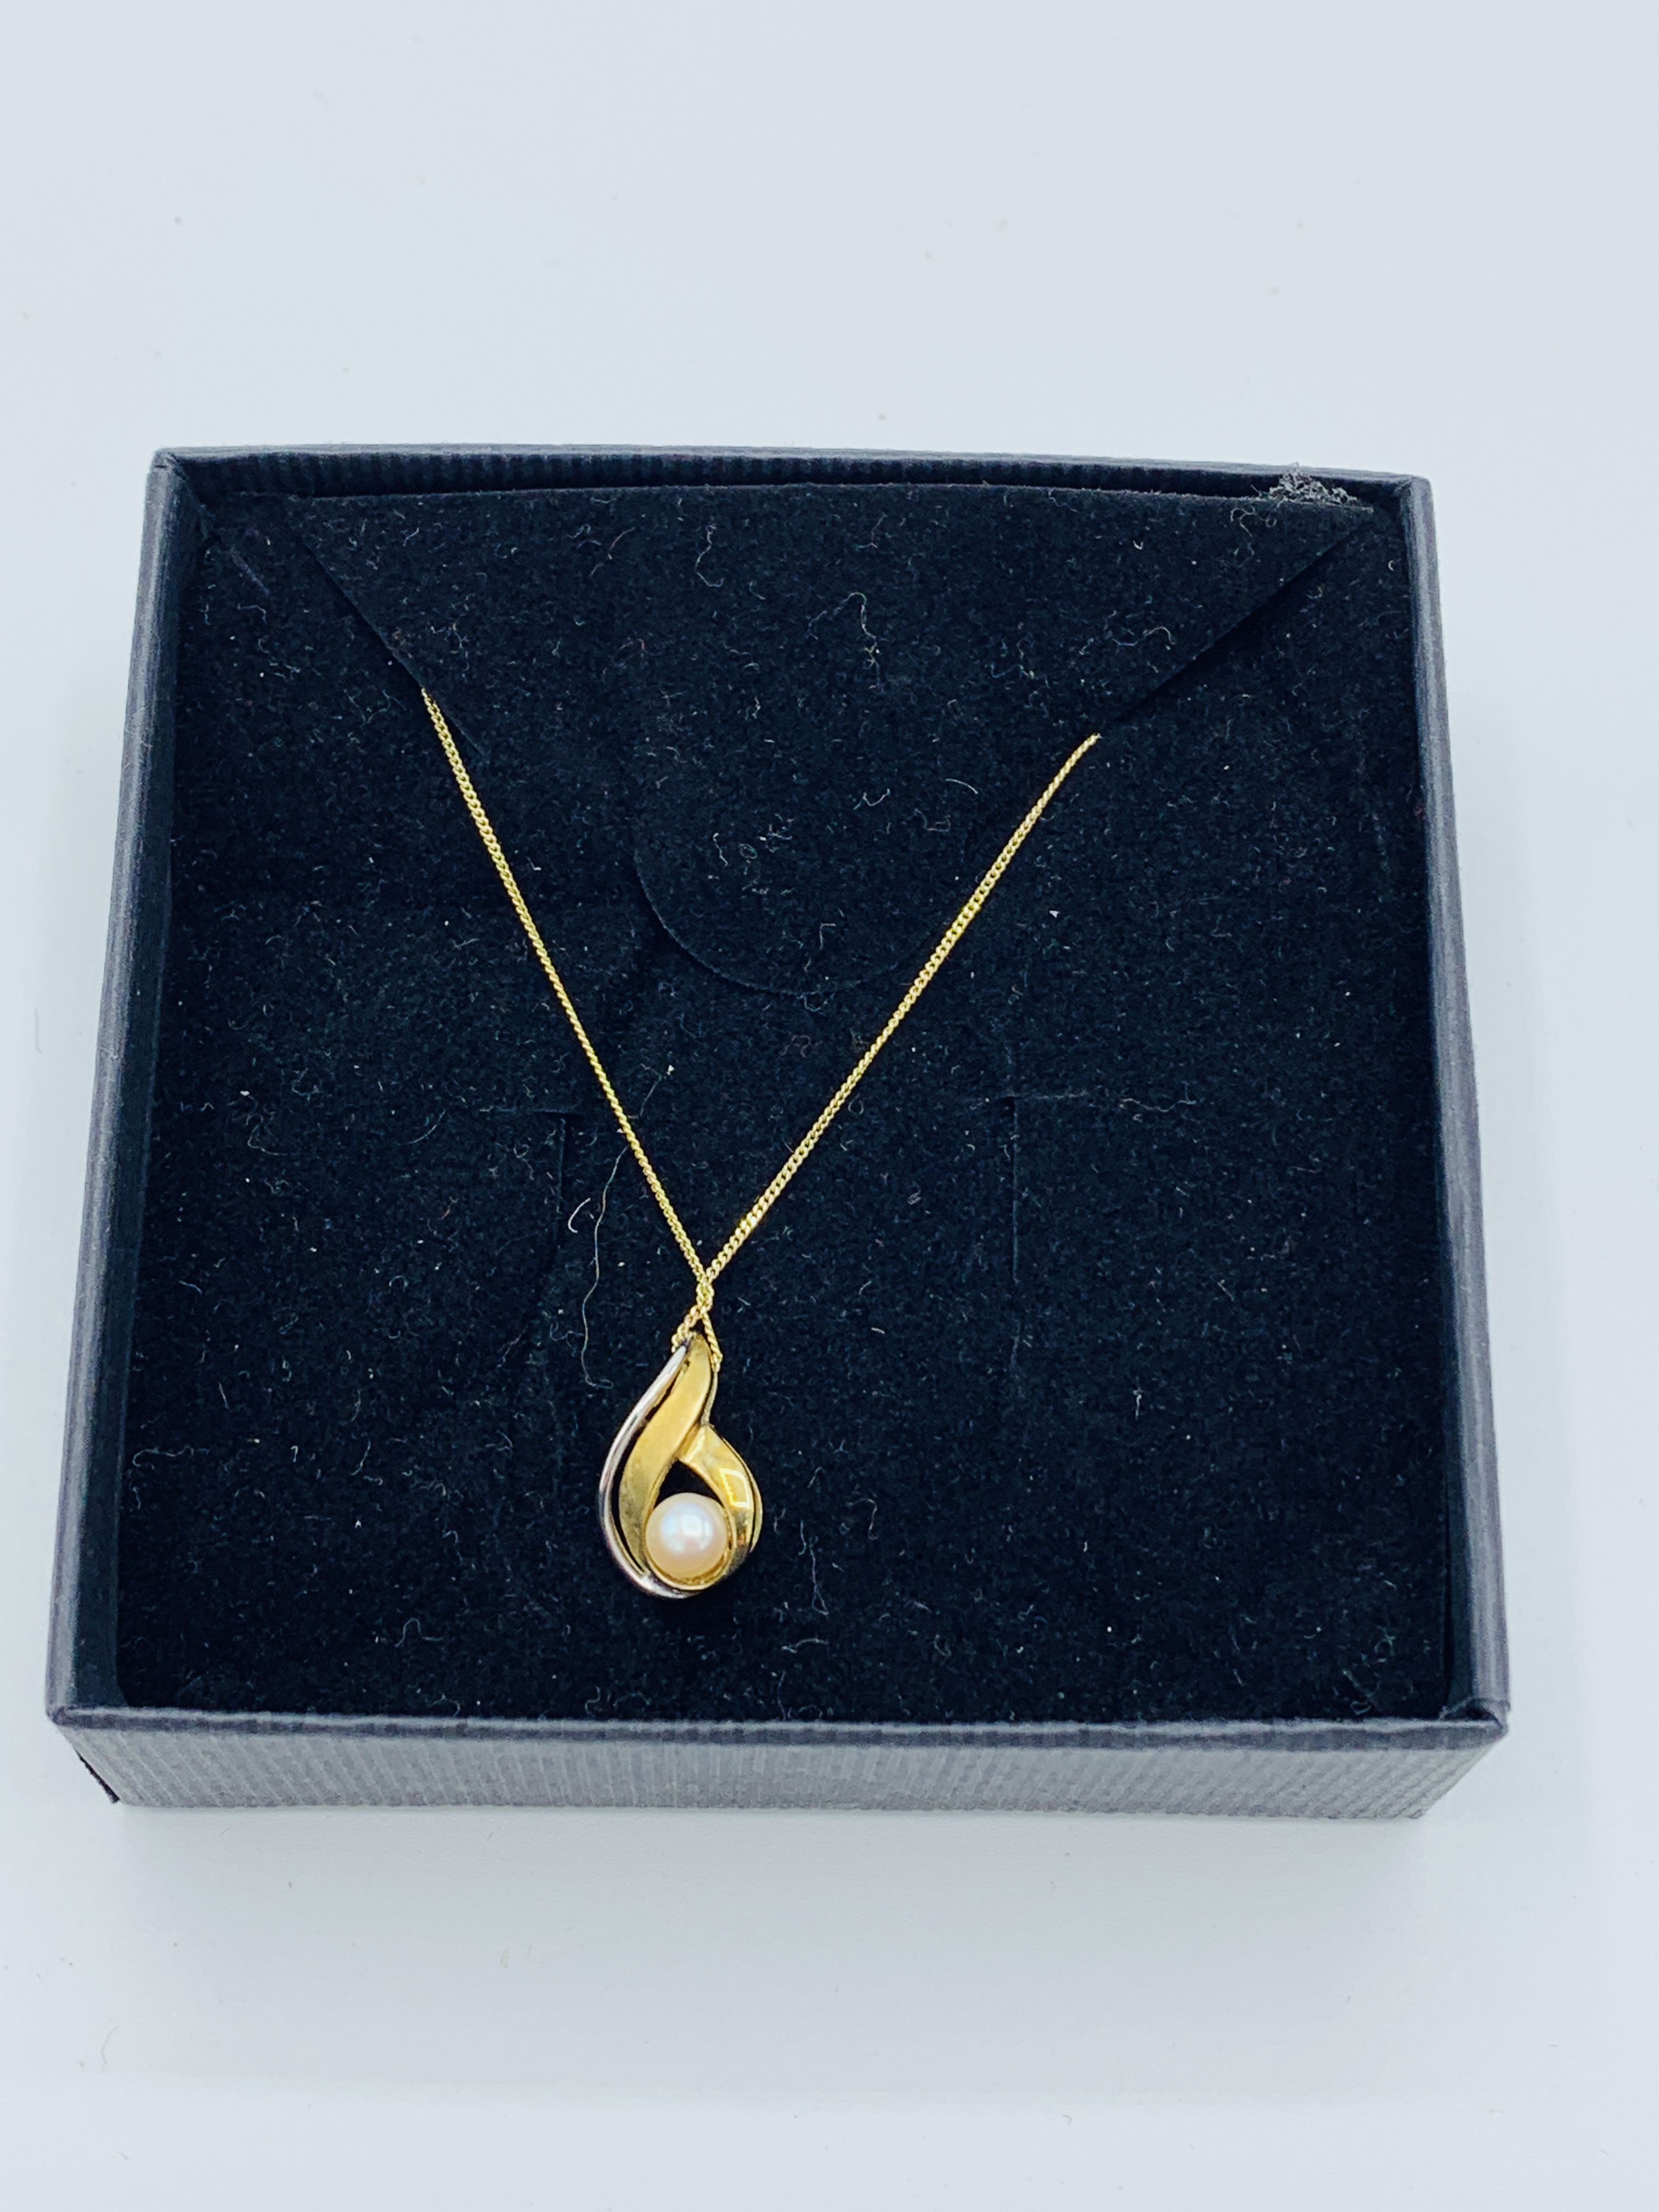 9ct gold and pearl pendant on a 9ct gold chain - Image 2 of 2